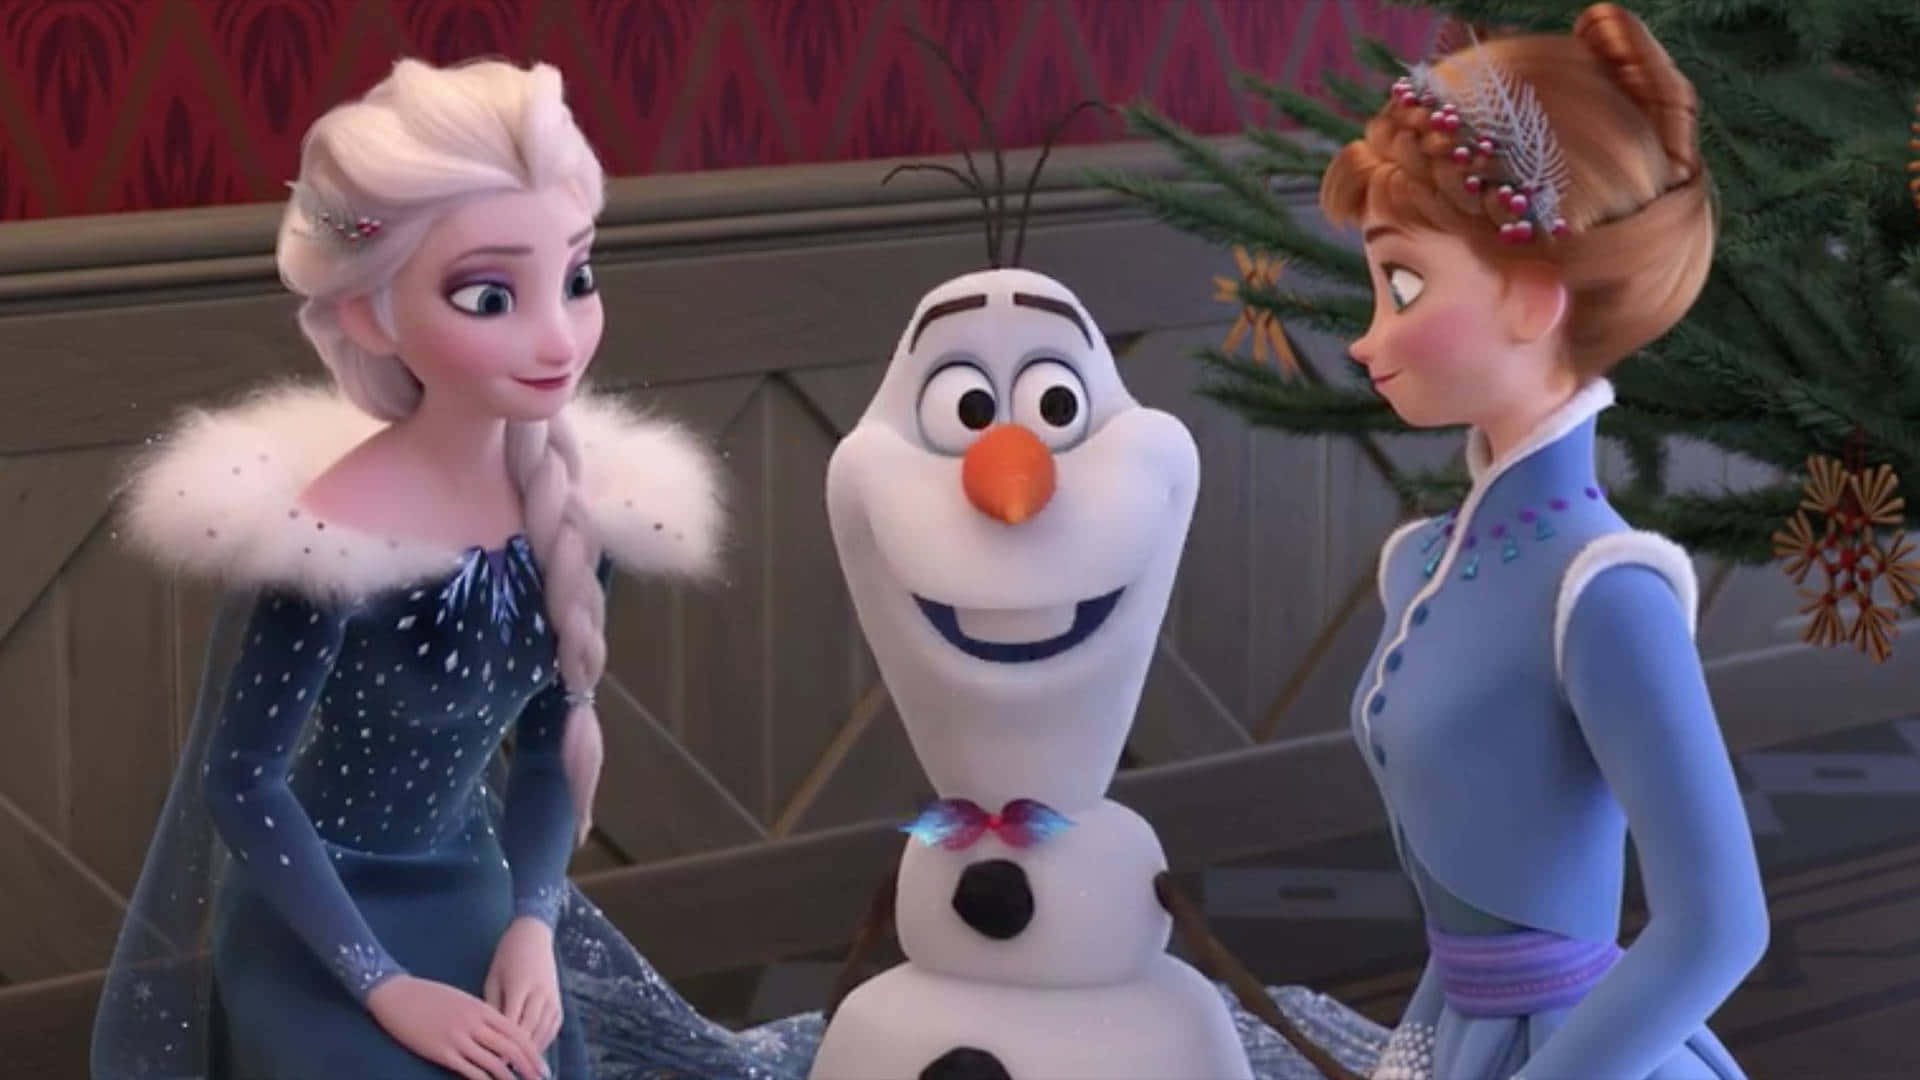 Anna and Elsa Go on a Journey Through Magical Environments in 'Frozen 2'